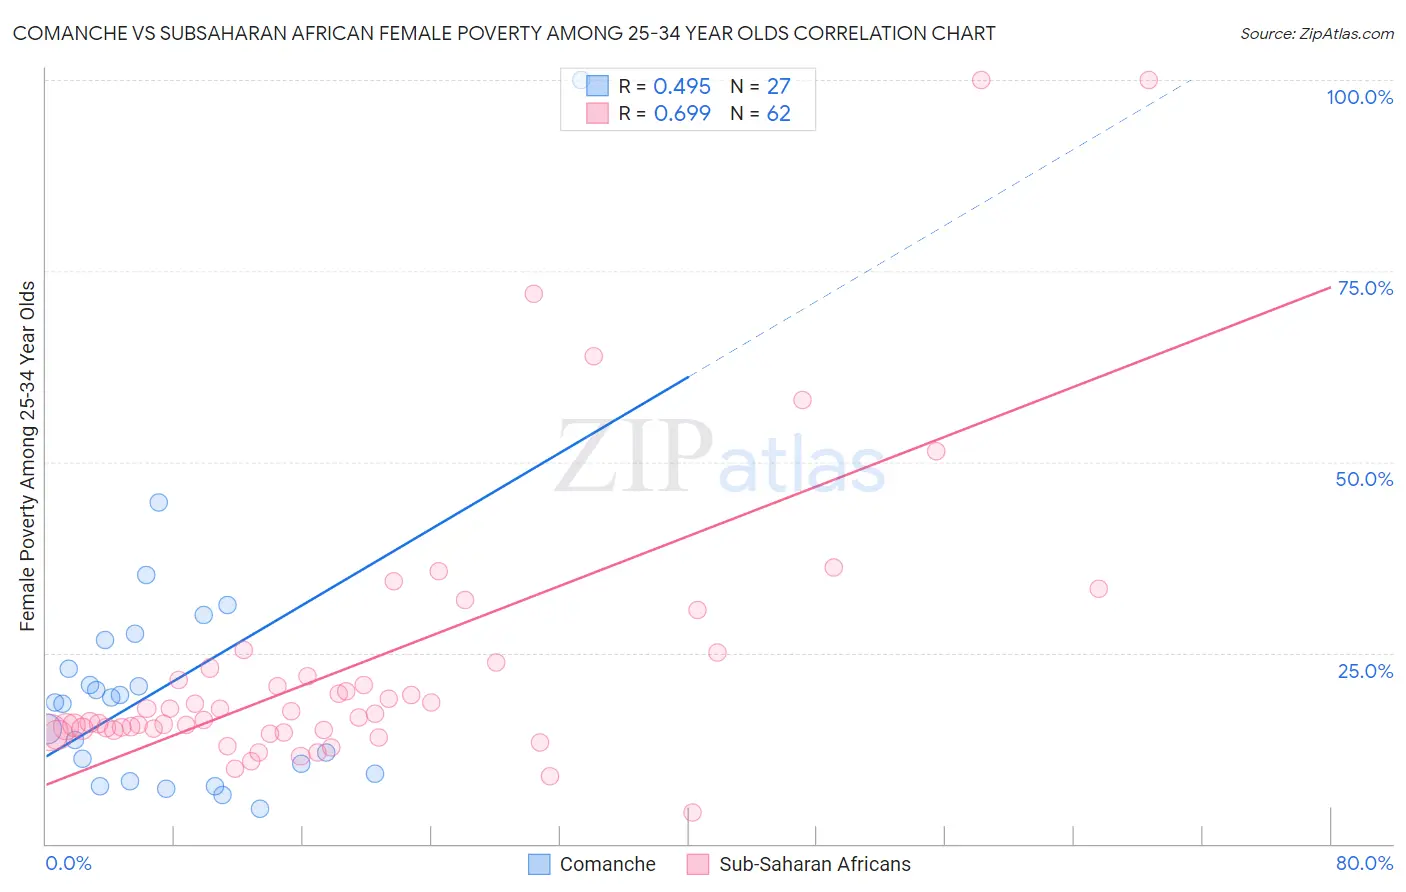 Comanche vs Subsaharan African Female Poverty Among 25-34 Year Olds